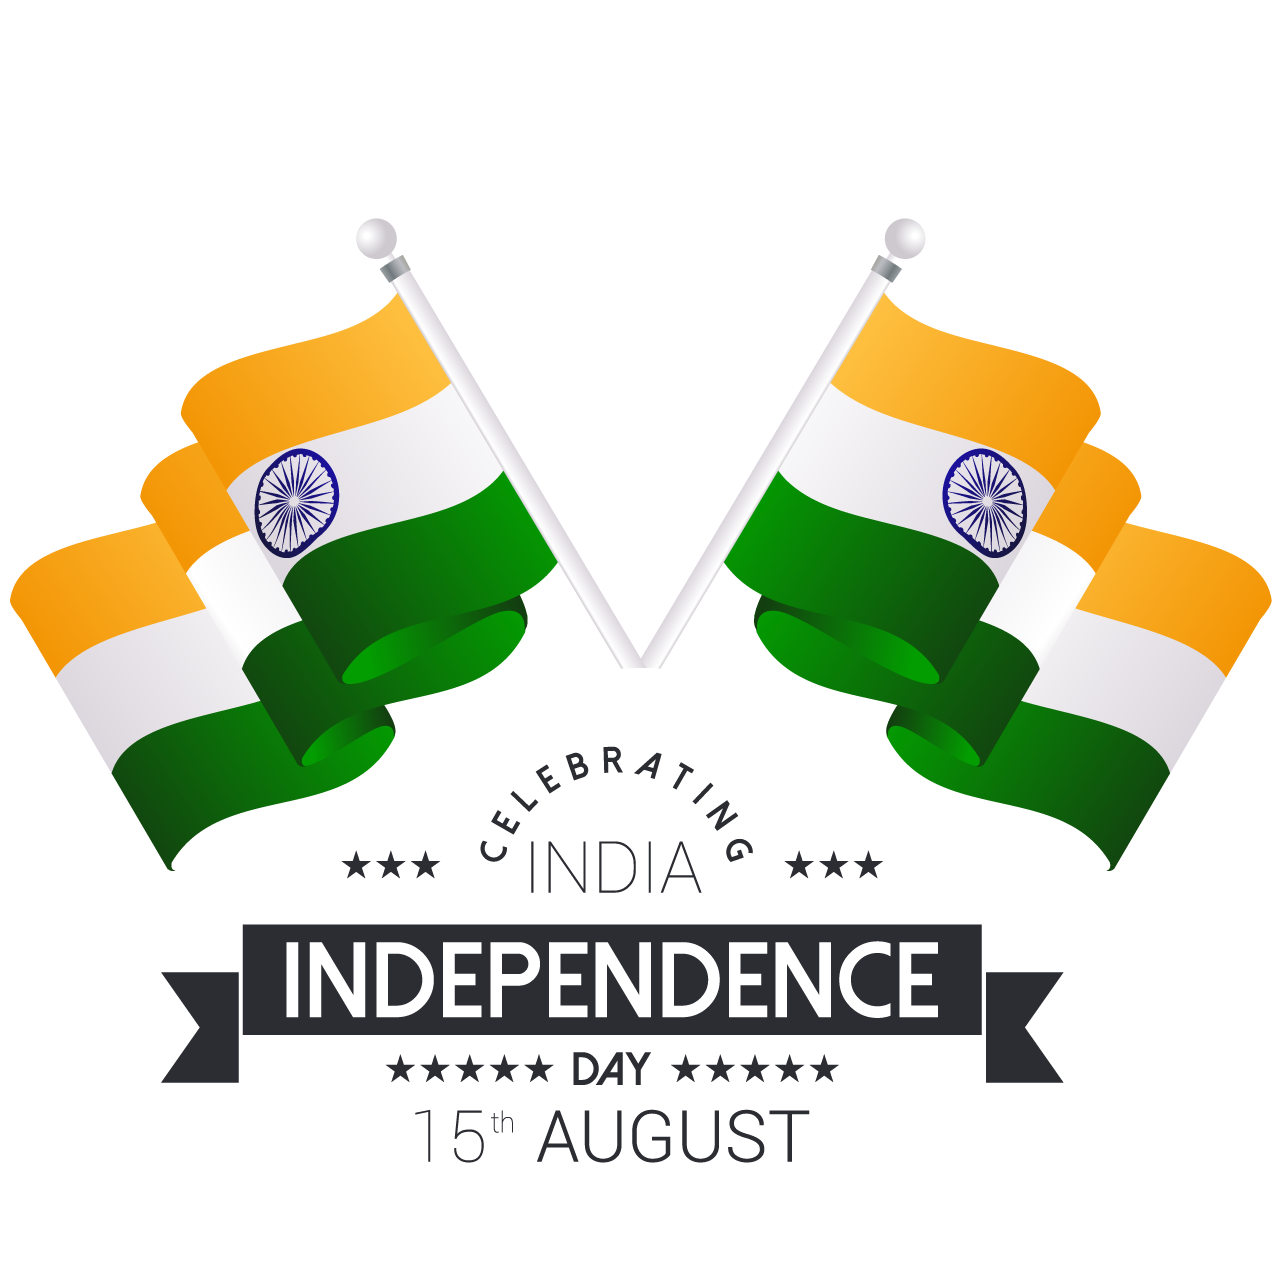 India independence day hand drawing sketch cartoon illustration image